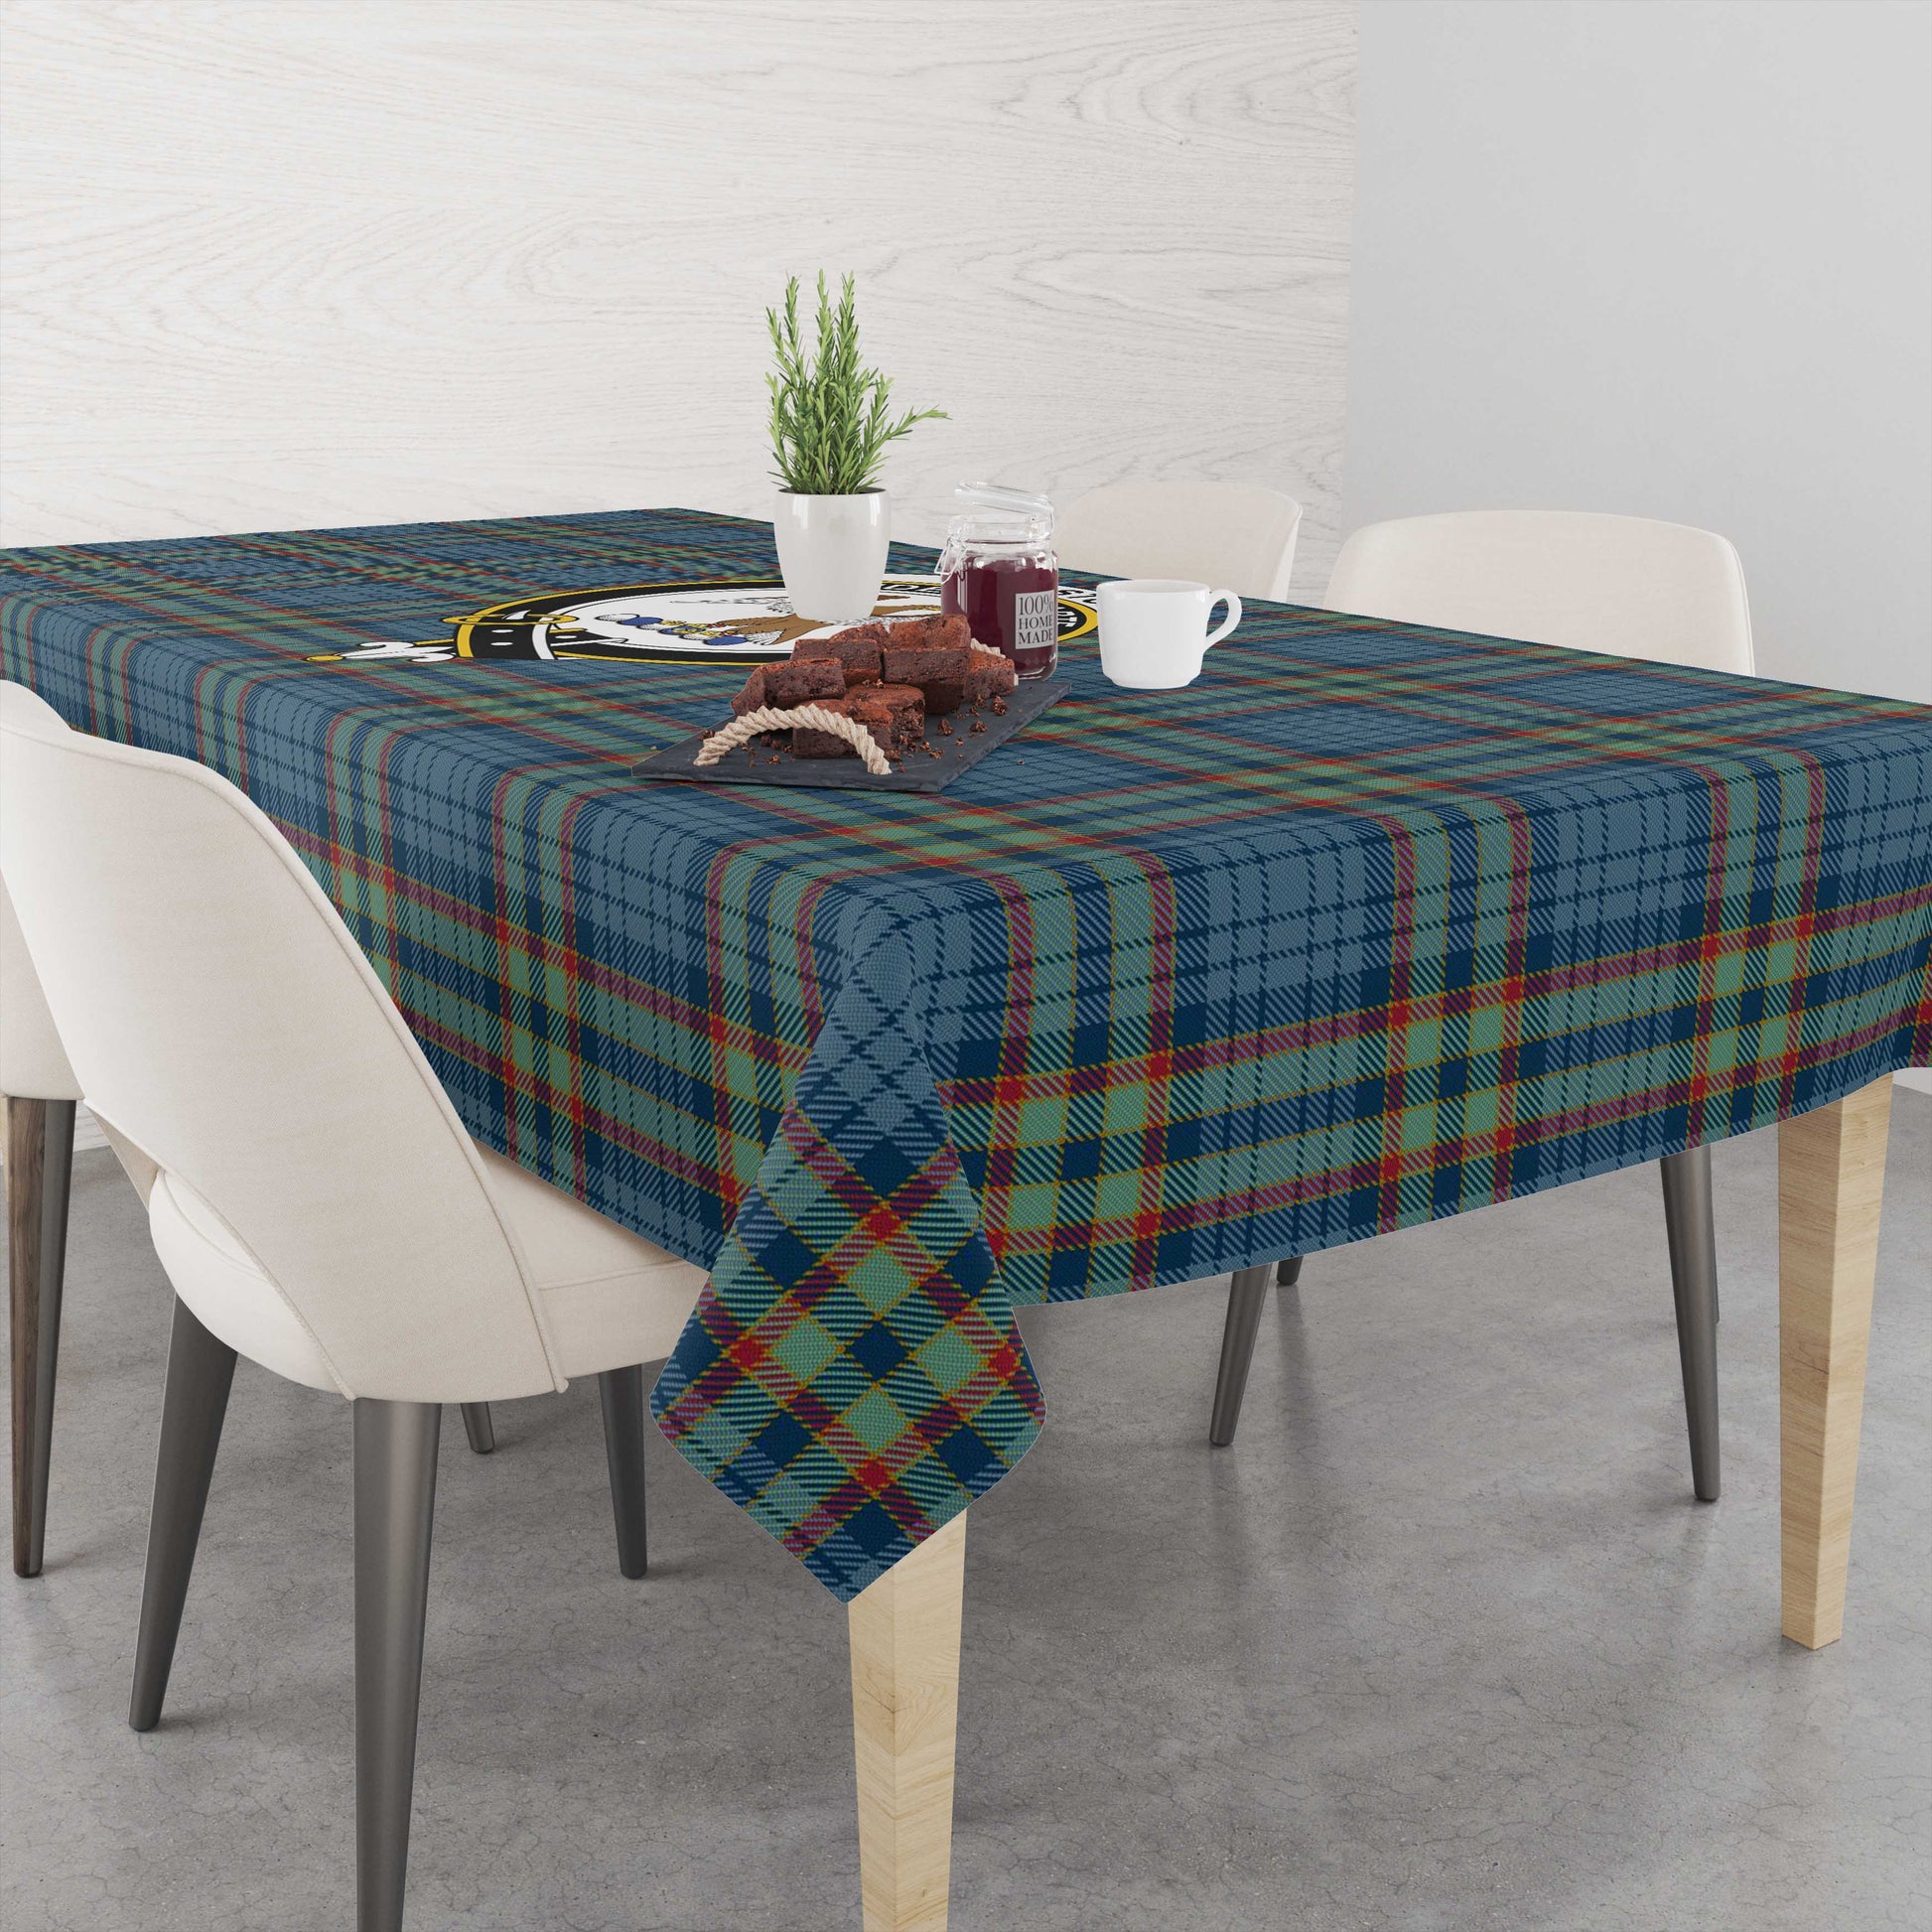 ralston-uk-tatan-tablecloth-with-family-crest